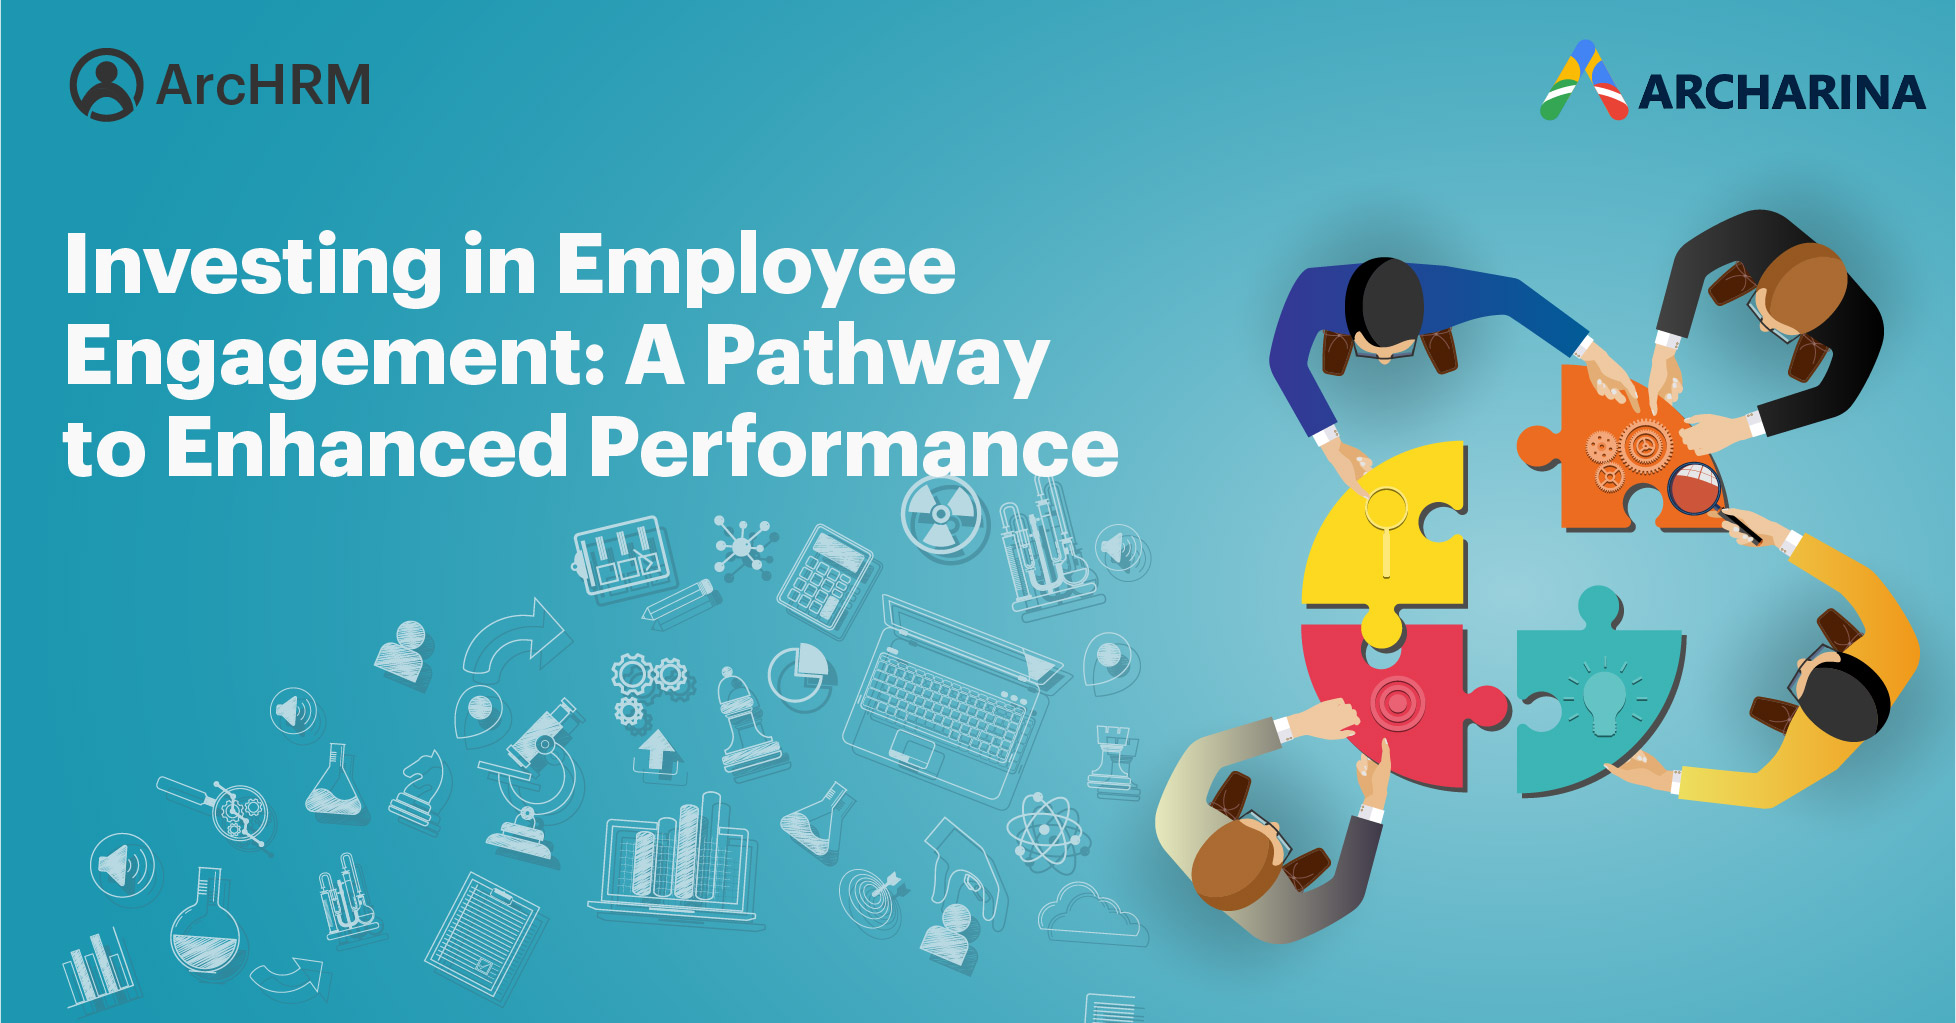 Investing in Employee Engagement: A Pathway to Enhanced Performance